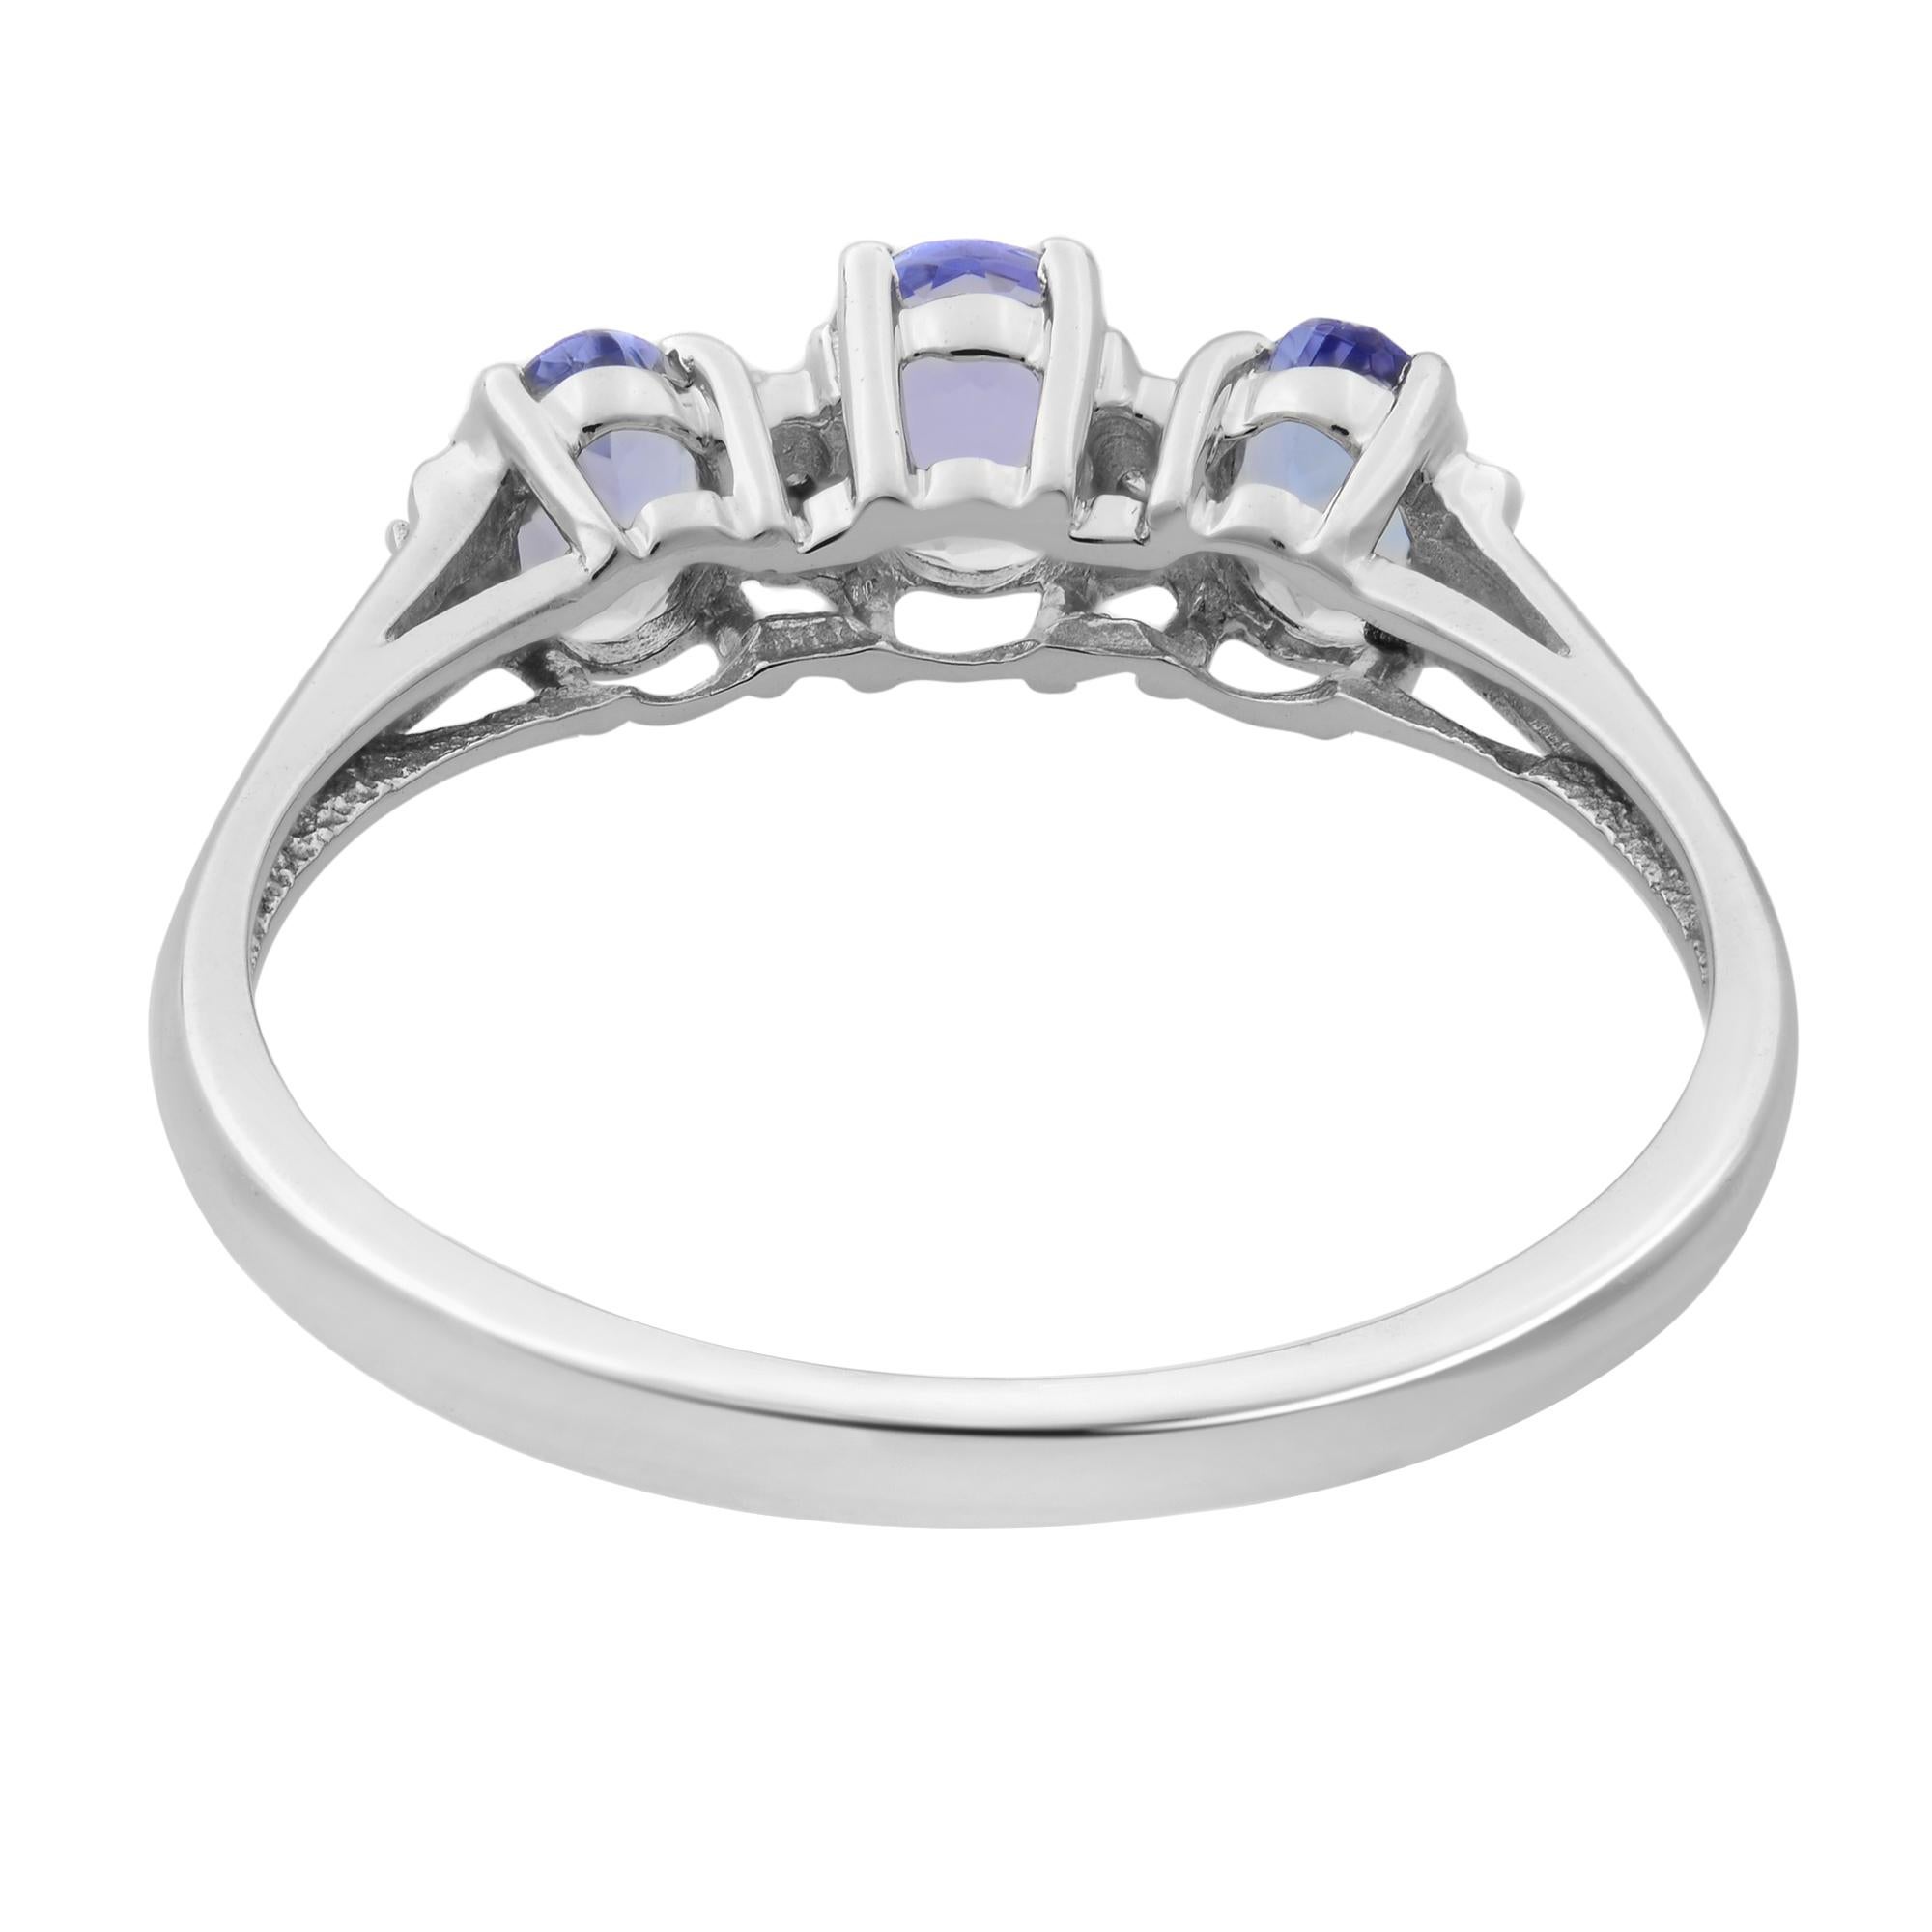 Rachel Koen Tanzanite Diamond Accent Ring 14K White Gold 0.86cttw In New Condition For Sale In New York, NY